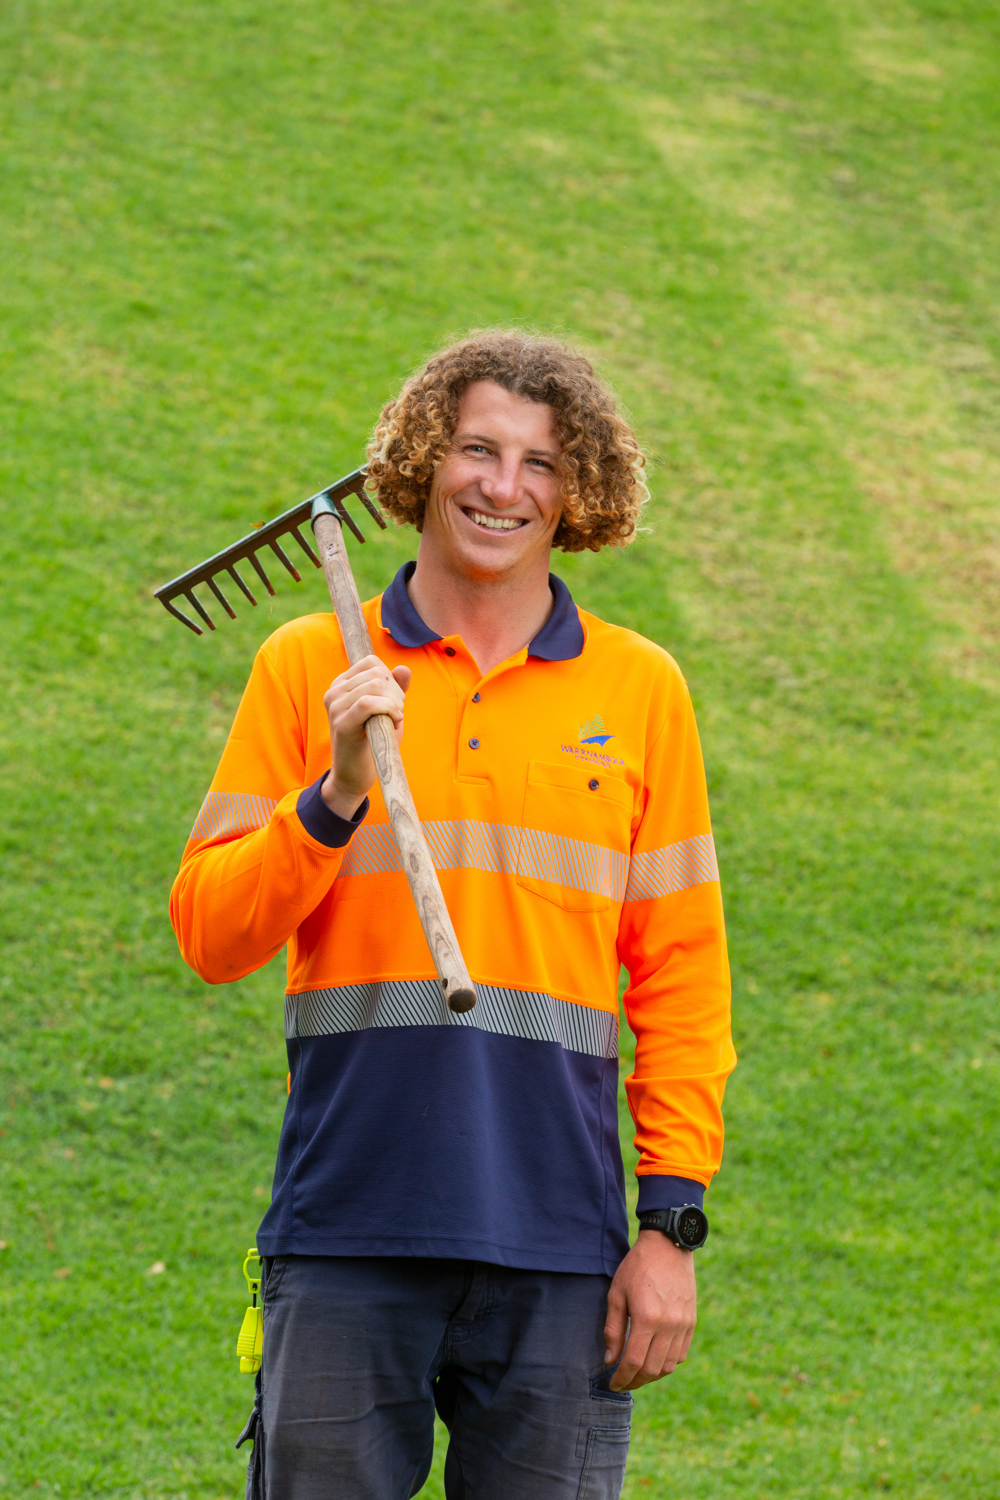 Matt working as a trainee at Warrnambool City Council in the Parks and Gardens team